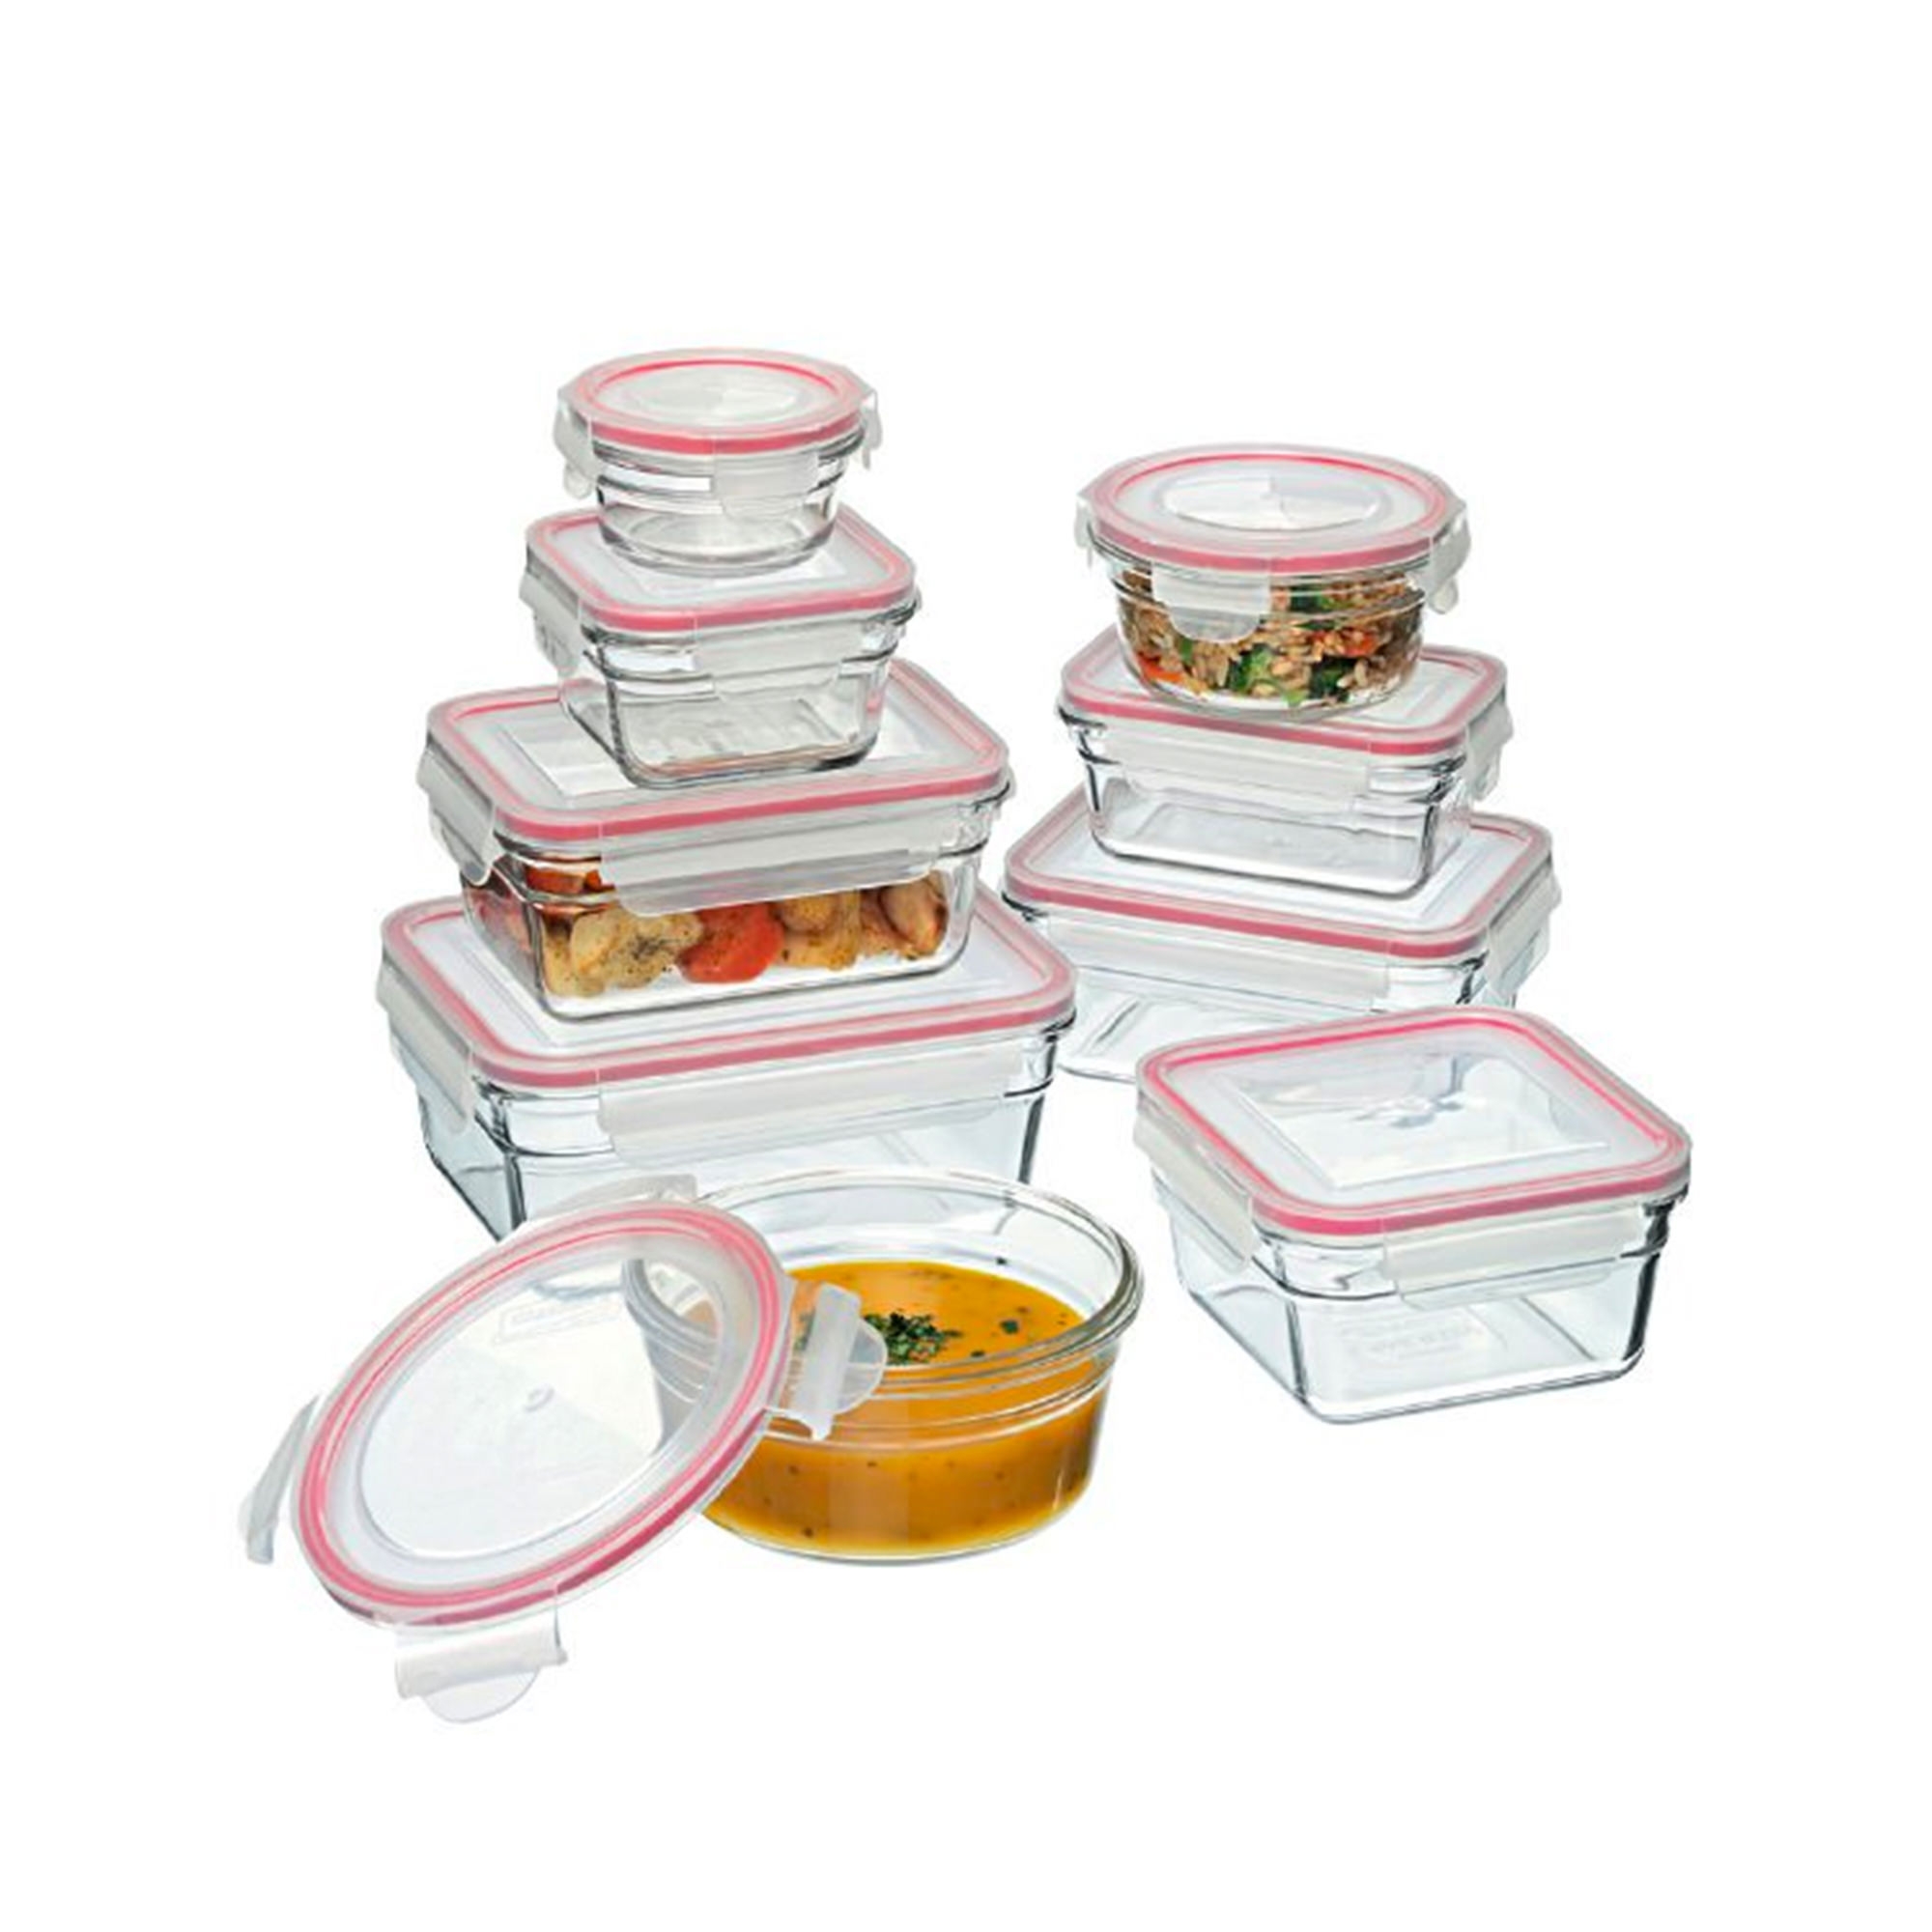 Glasslock Oven Safe Container Set 9pc Image 2